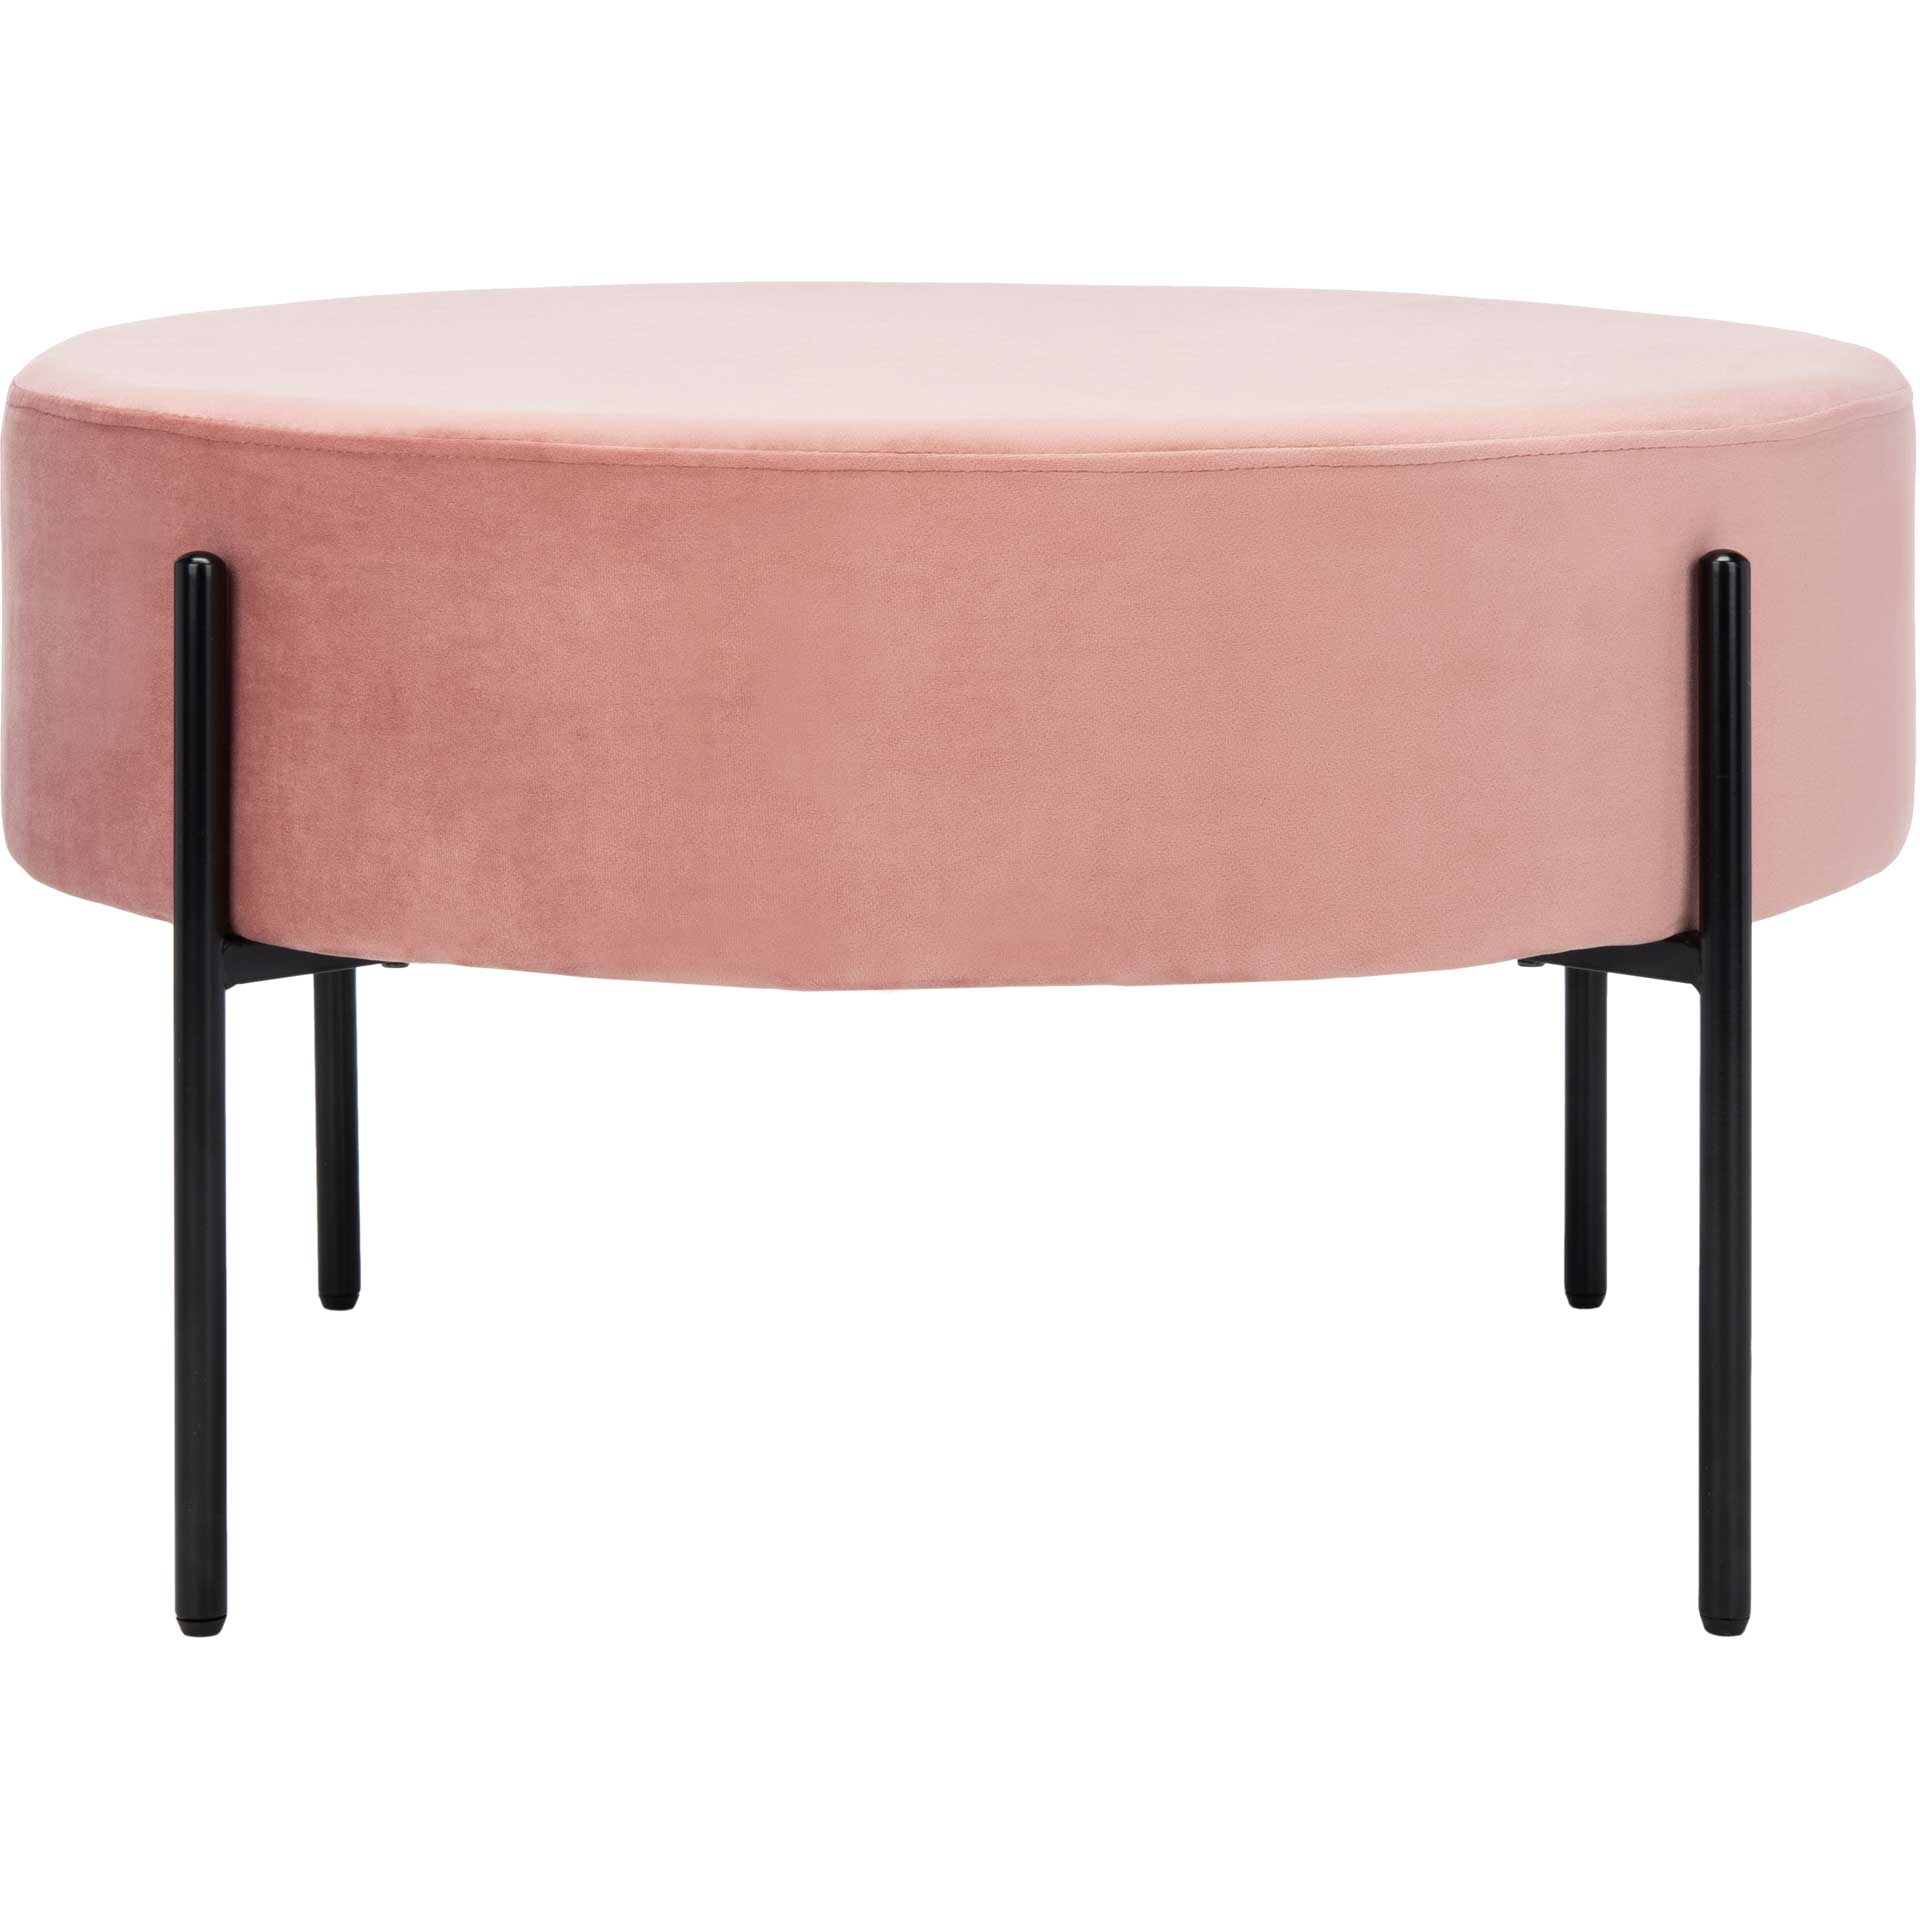 Lincoln Round Cocktail Ottoman Dusty Rose/Black